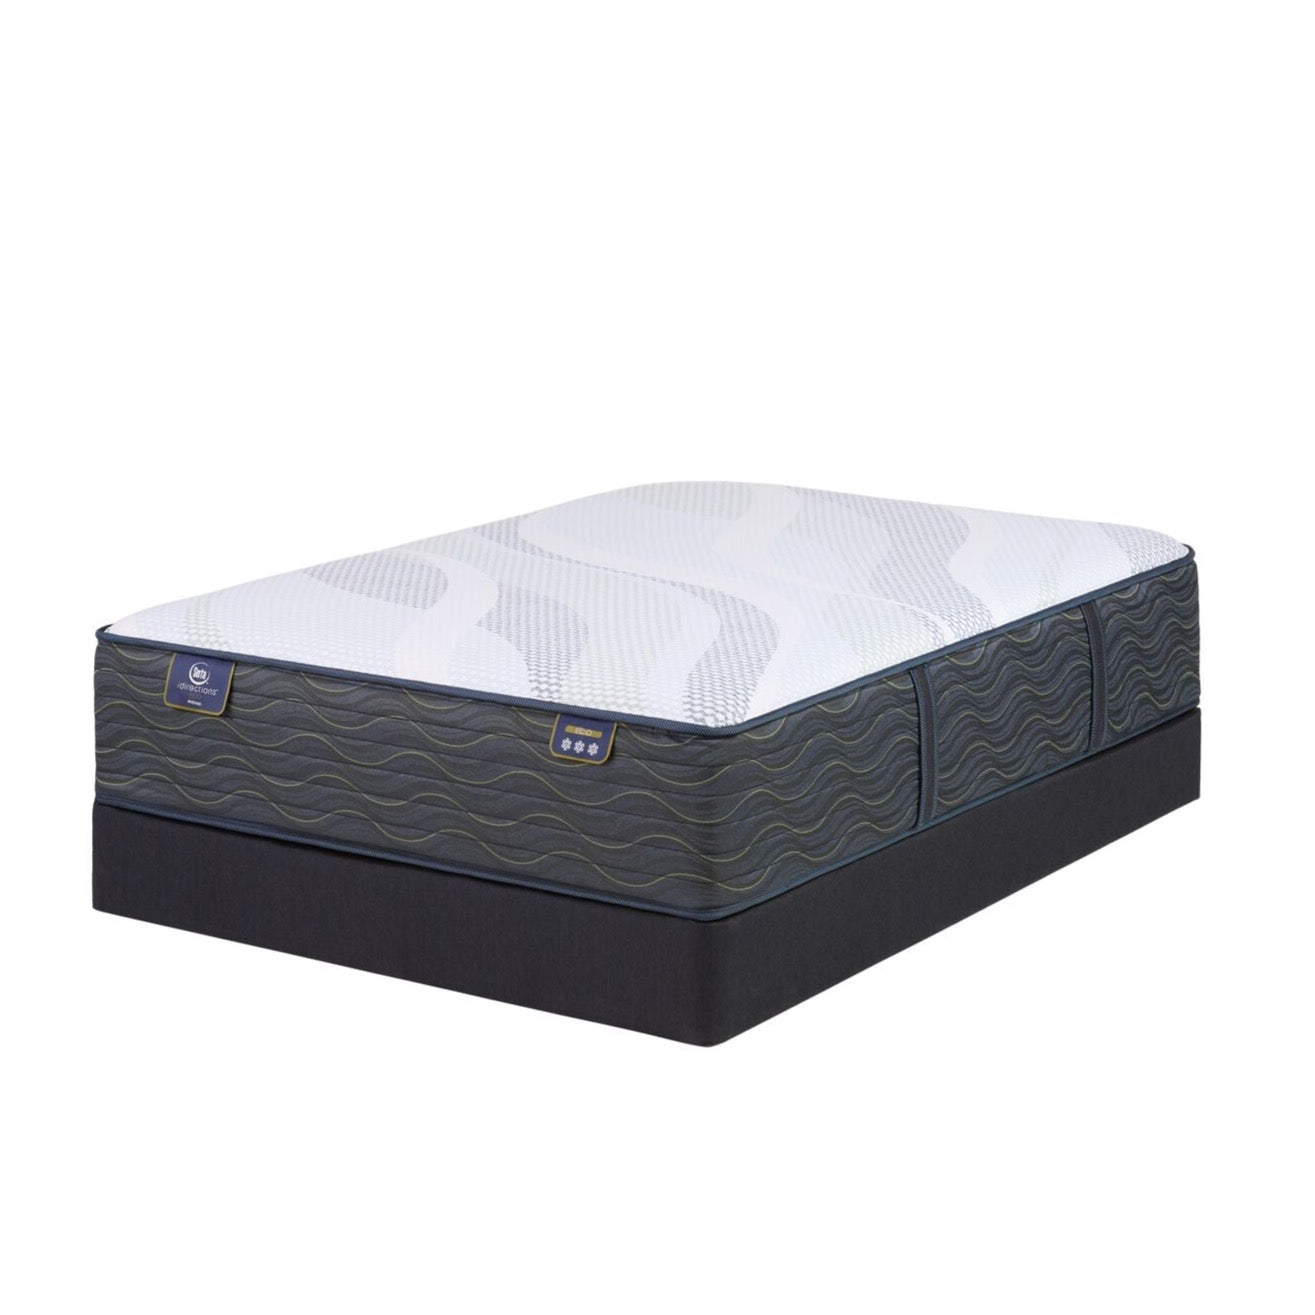 Picture of Serta iDirectionsECO Ambrosia Cushion Firm Hybrid Mattress